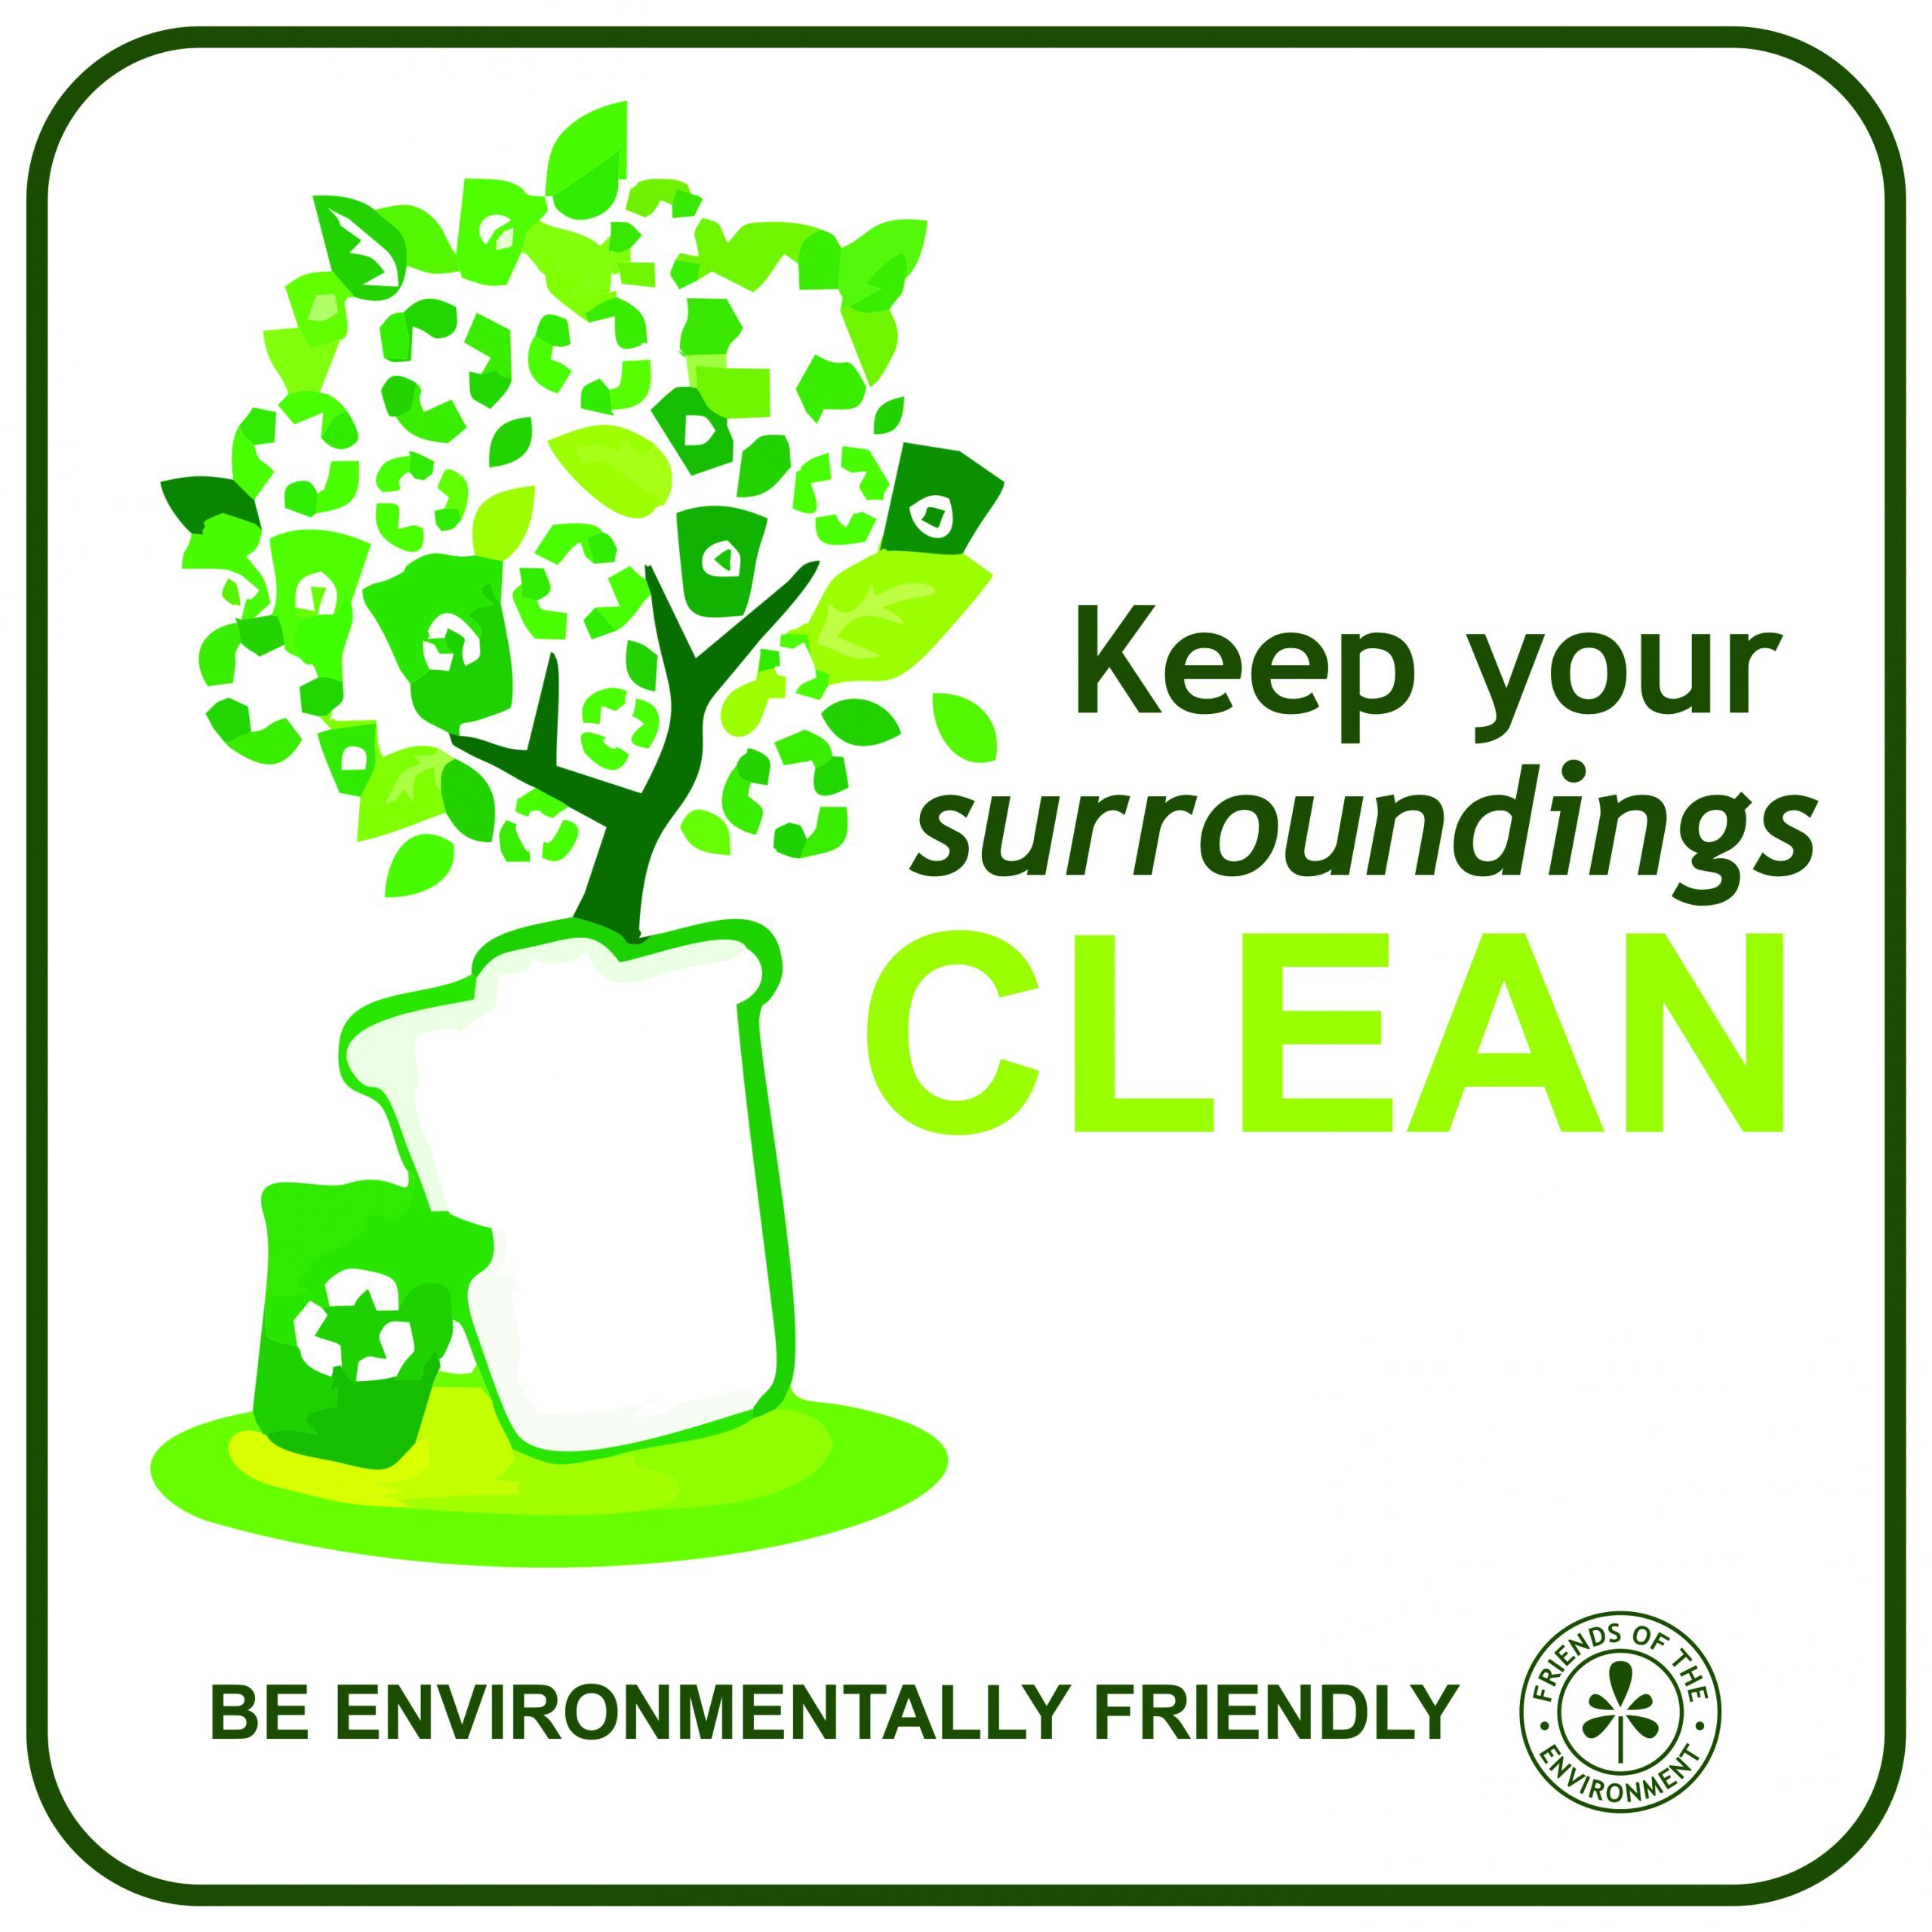 ways to maintain cleanliness in our surroundings